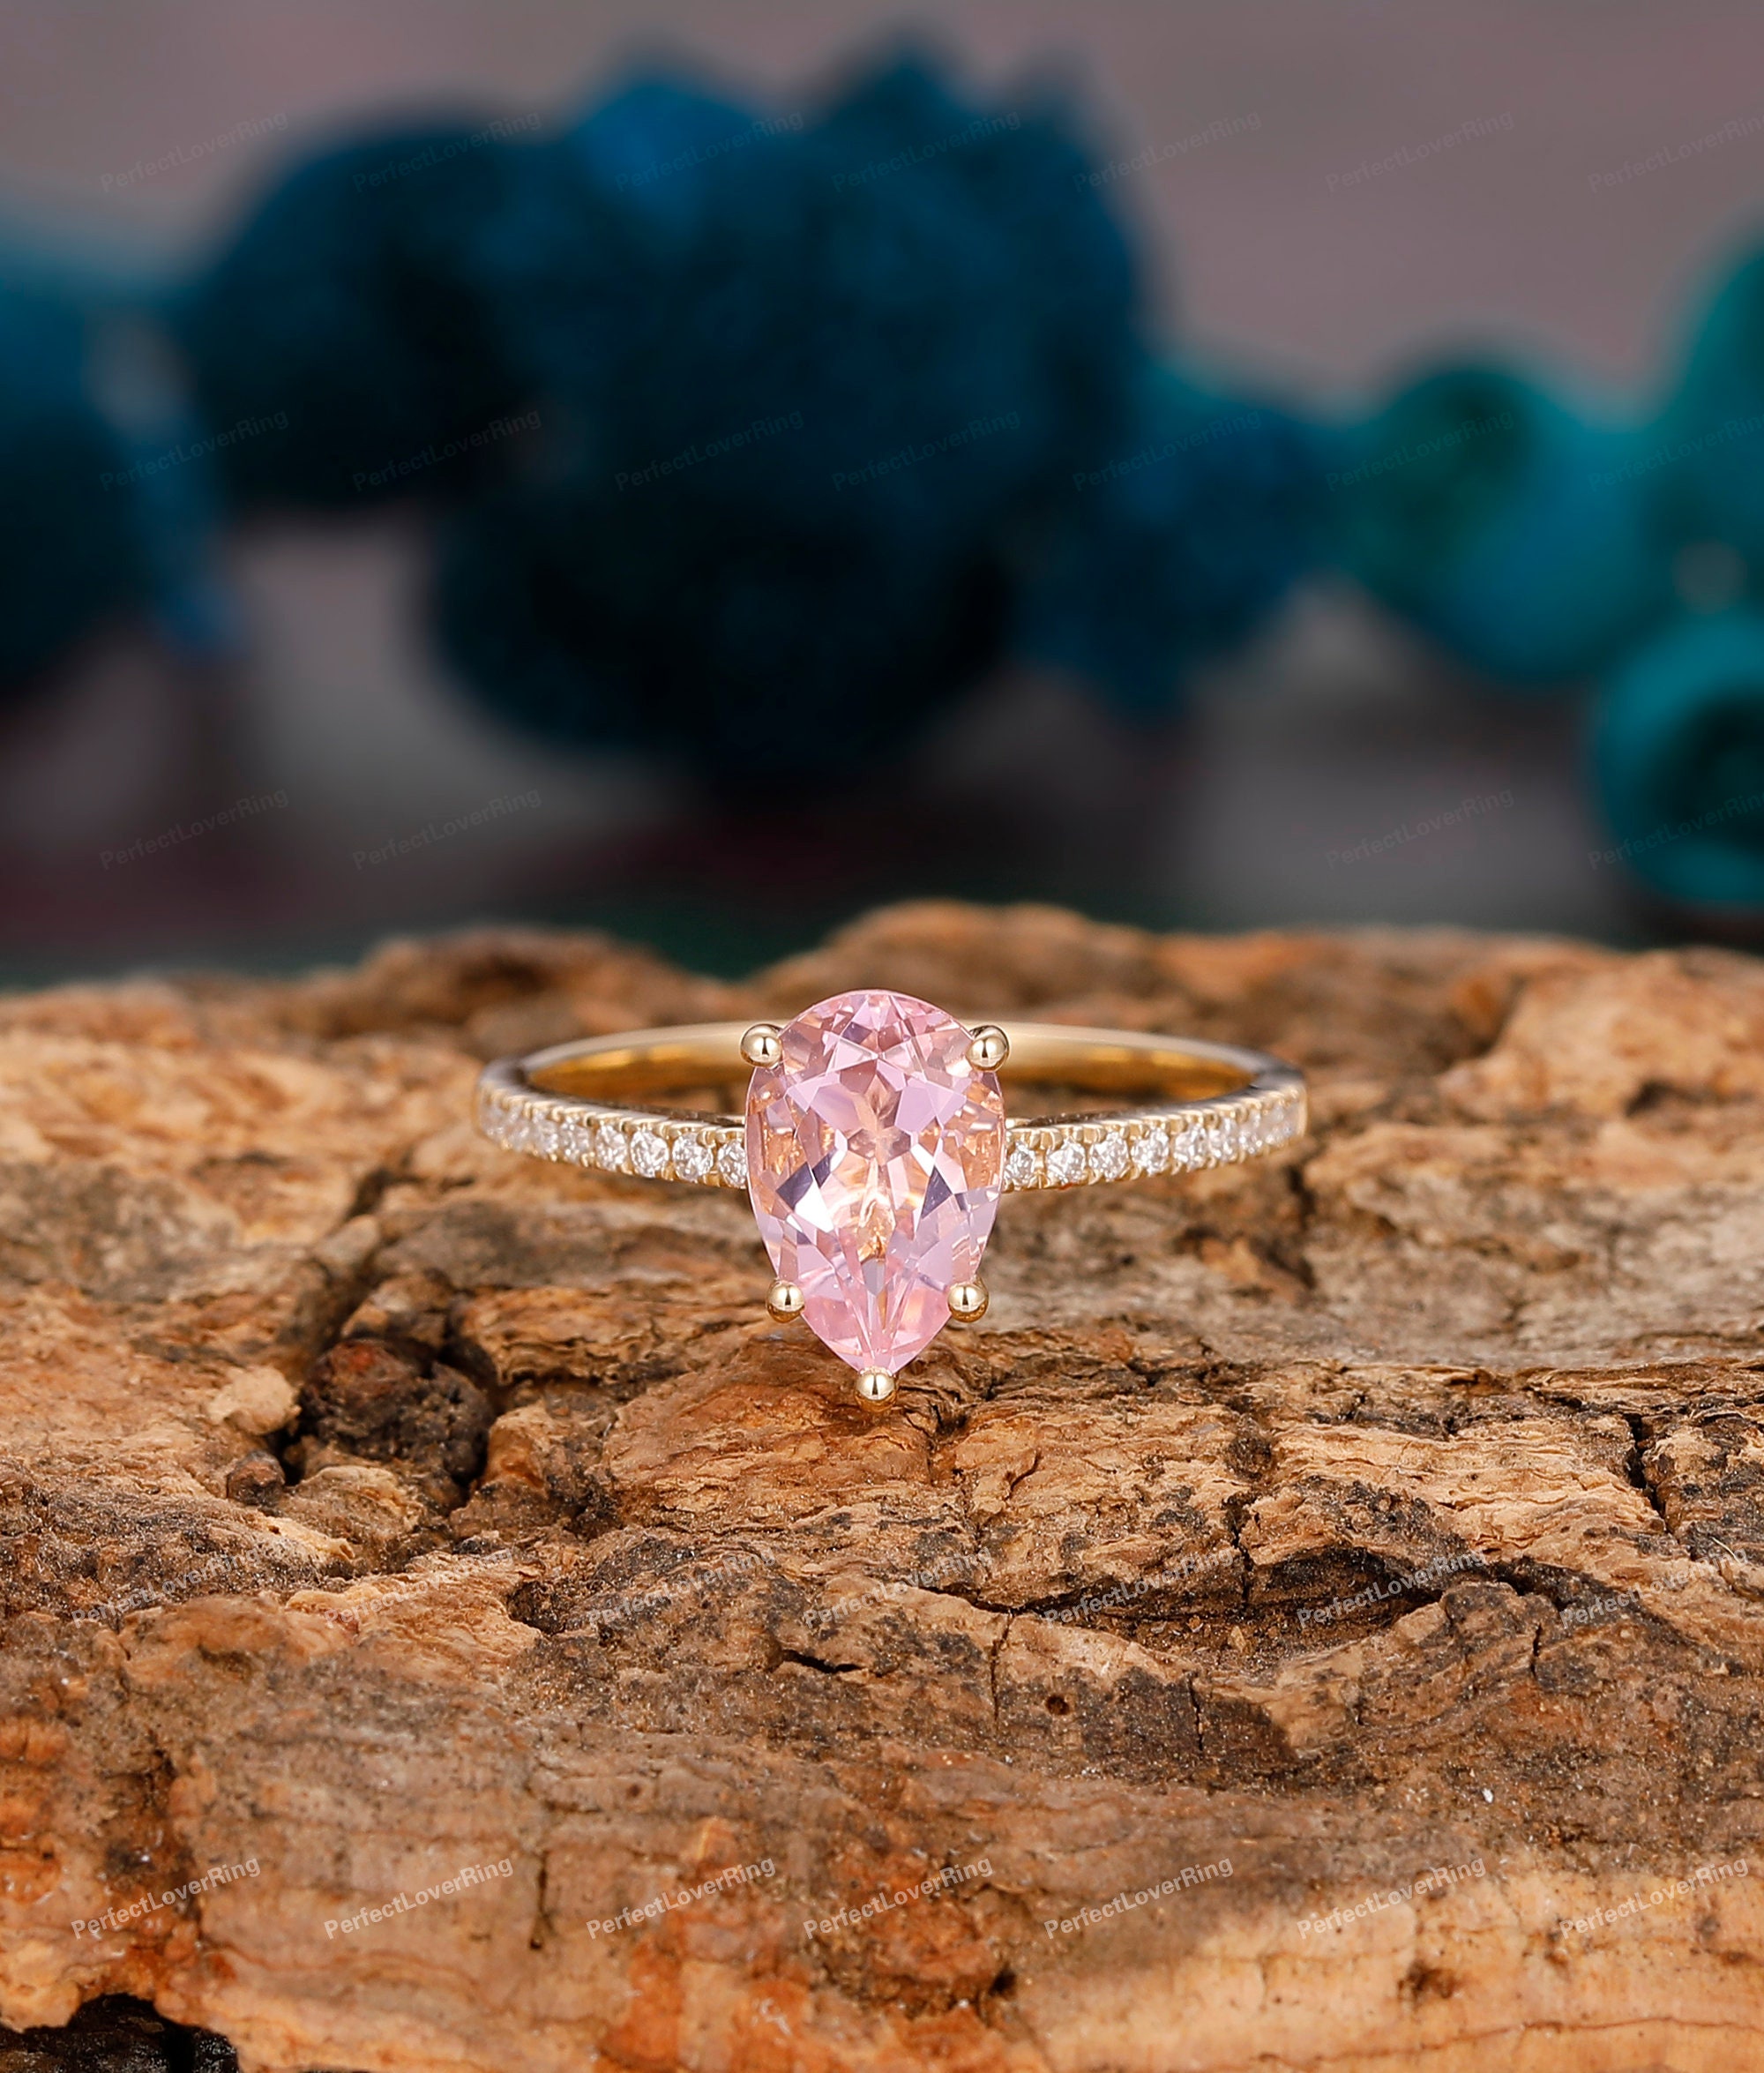 The Immaculate Heart Pink Sapphire Engagment Ring 4 / Natural Purple Sapphire (Requires Extended Handcrafted Time at 8 Weeks Due to Scarcity of Stone)